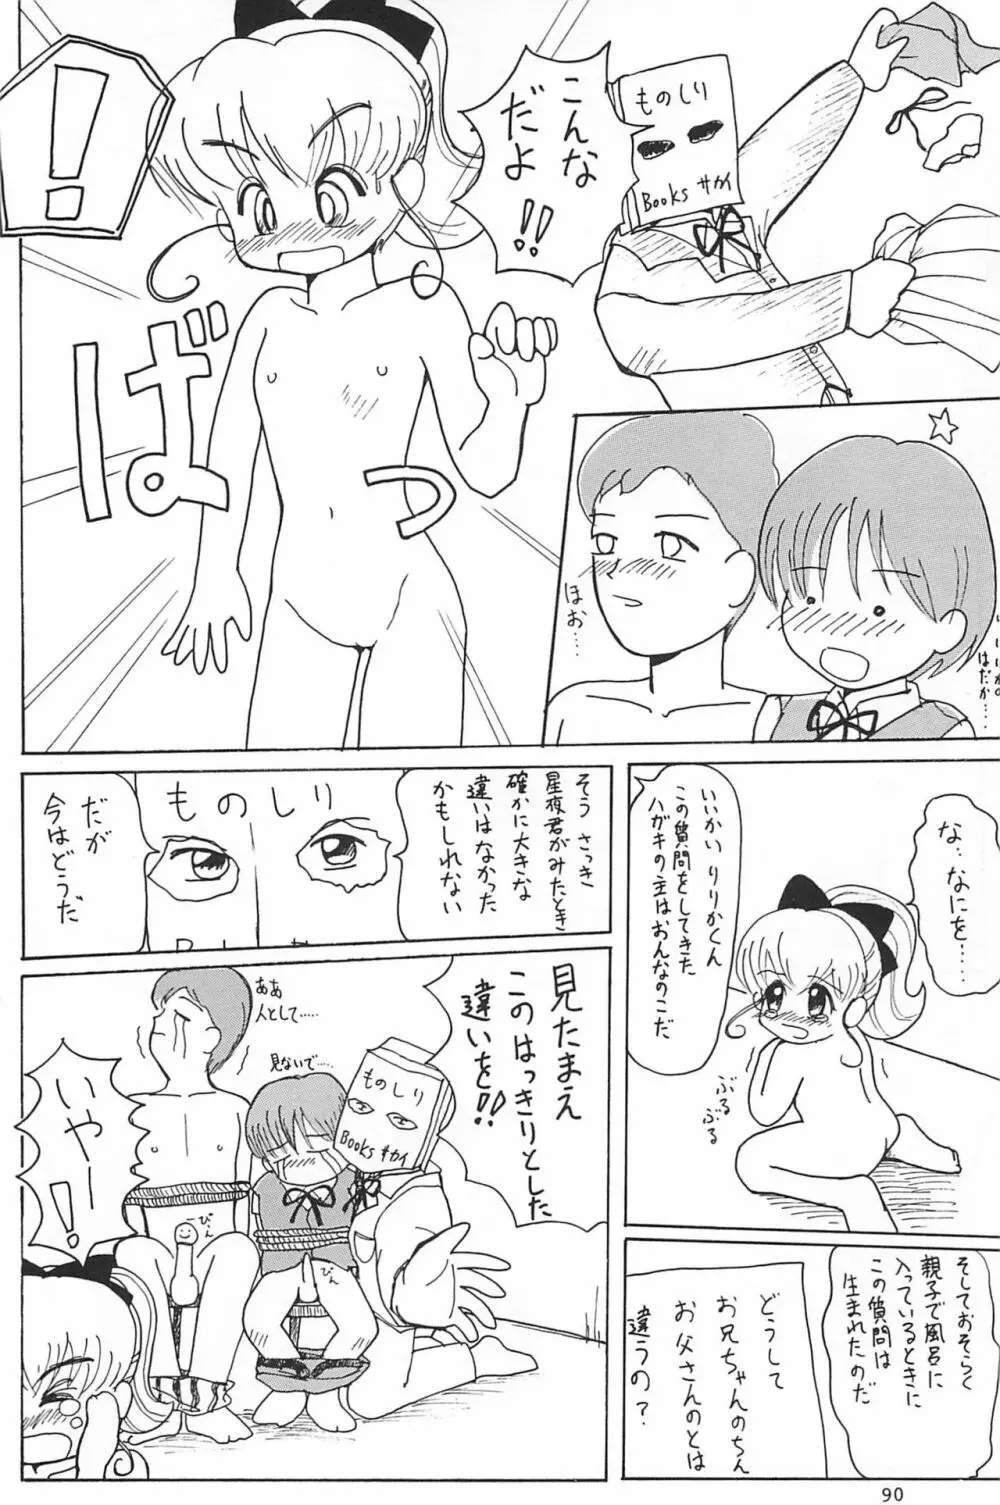 ND-special Volume 1 90ページ